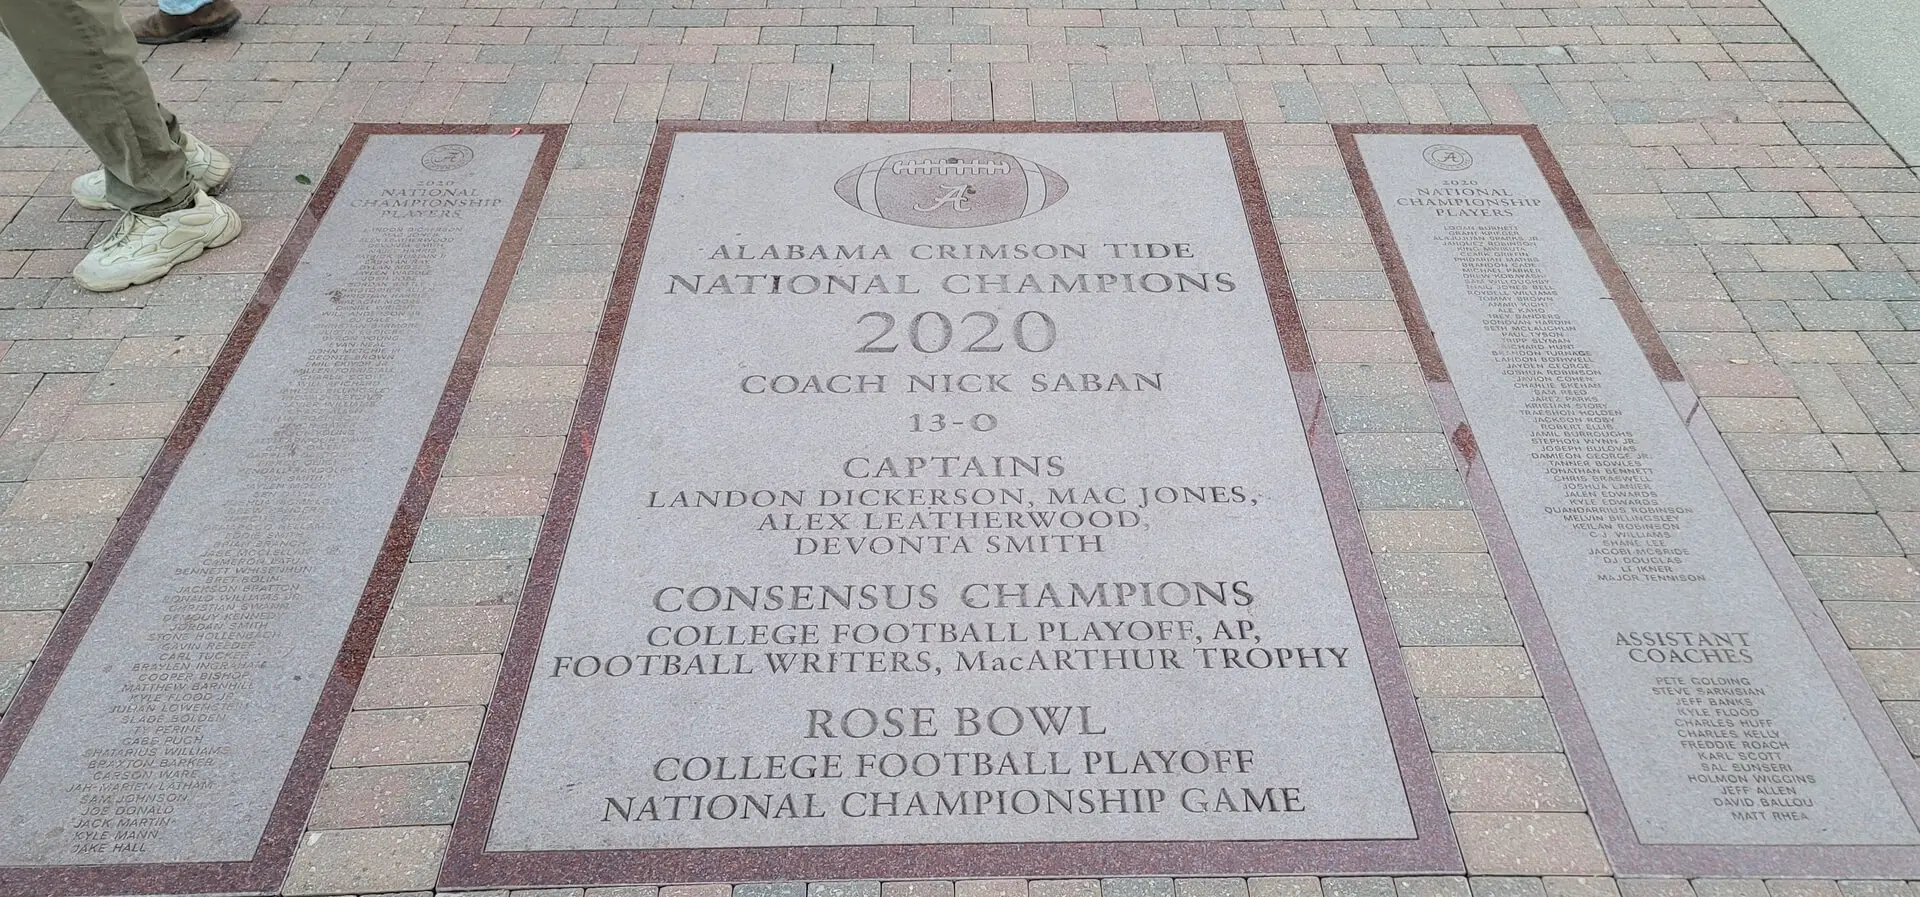 A memorial engraving about Alabama National Champions on the floor